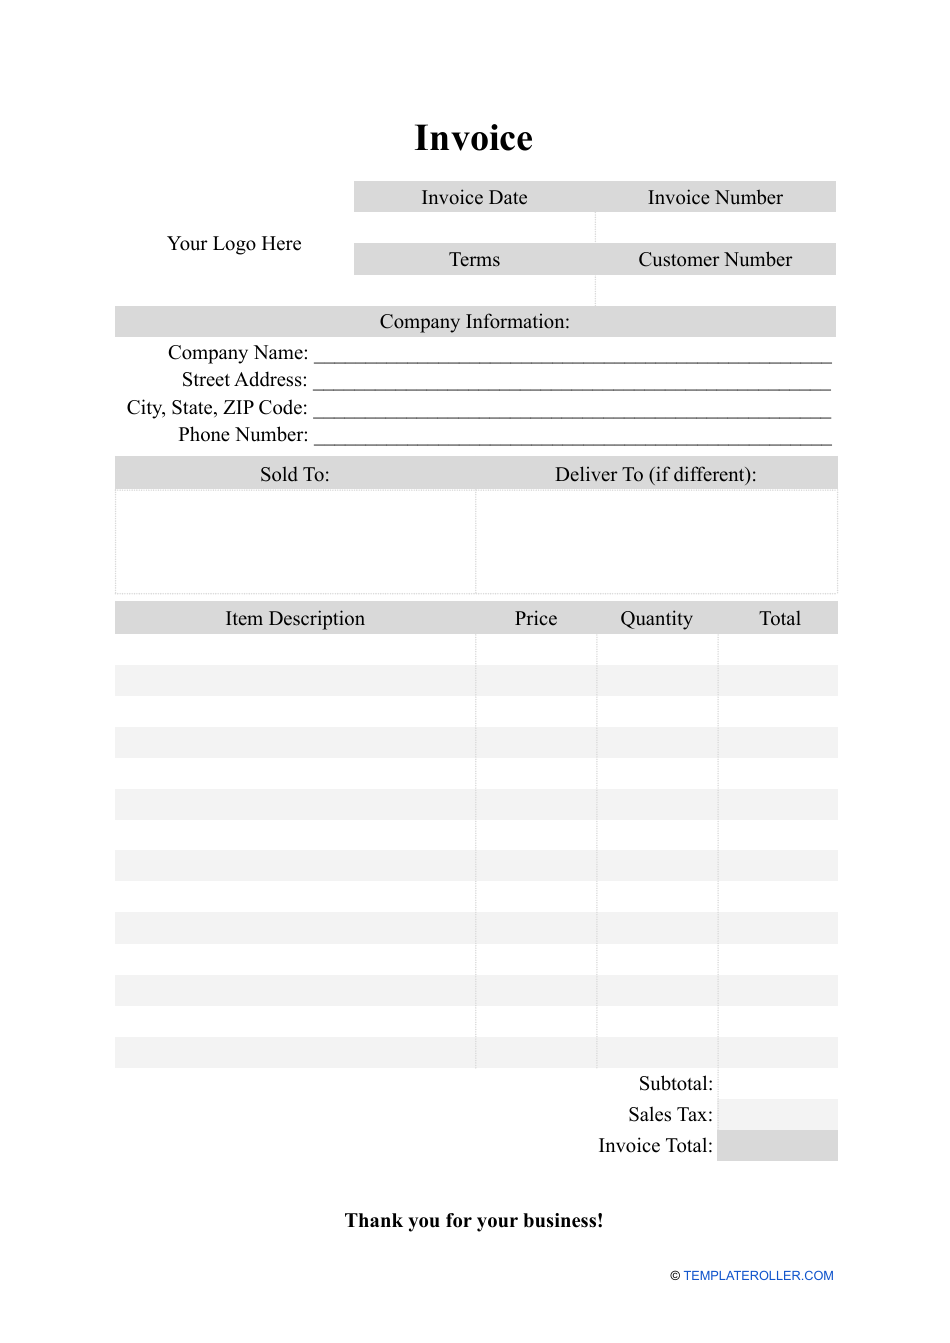 Blank Invoice Template - Portrait, Page 1